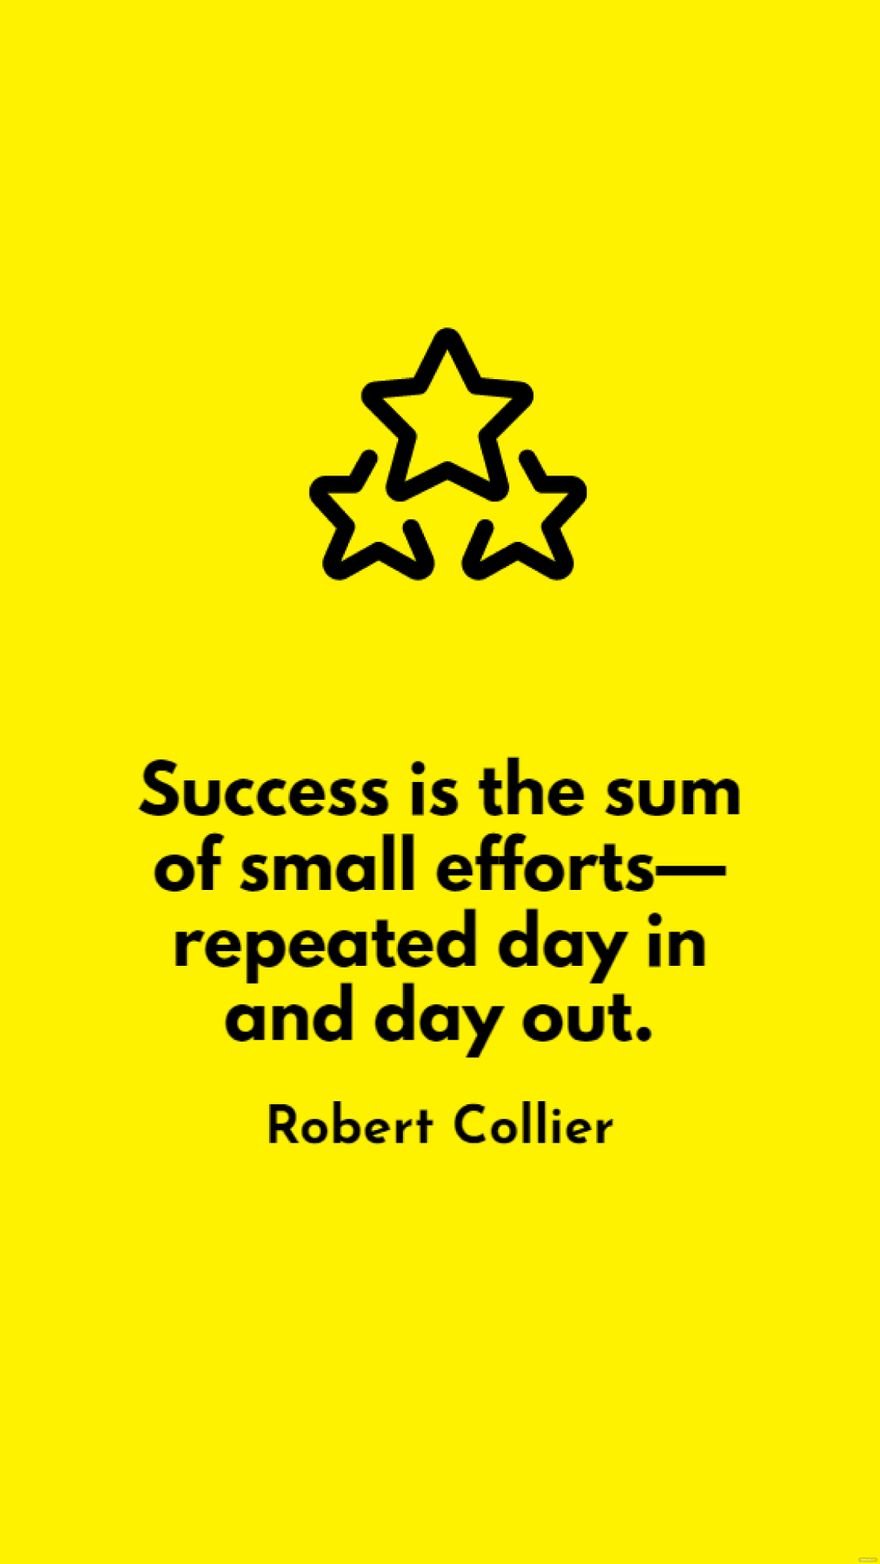 Free Robert Collier - Success is the sum of small efforts - repeated day in and day out. in JPG